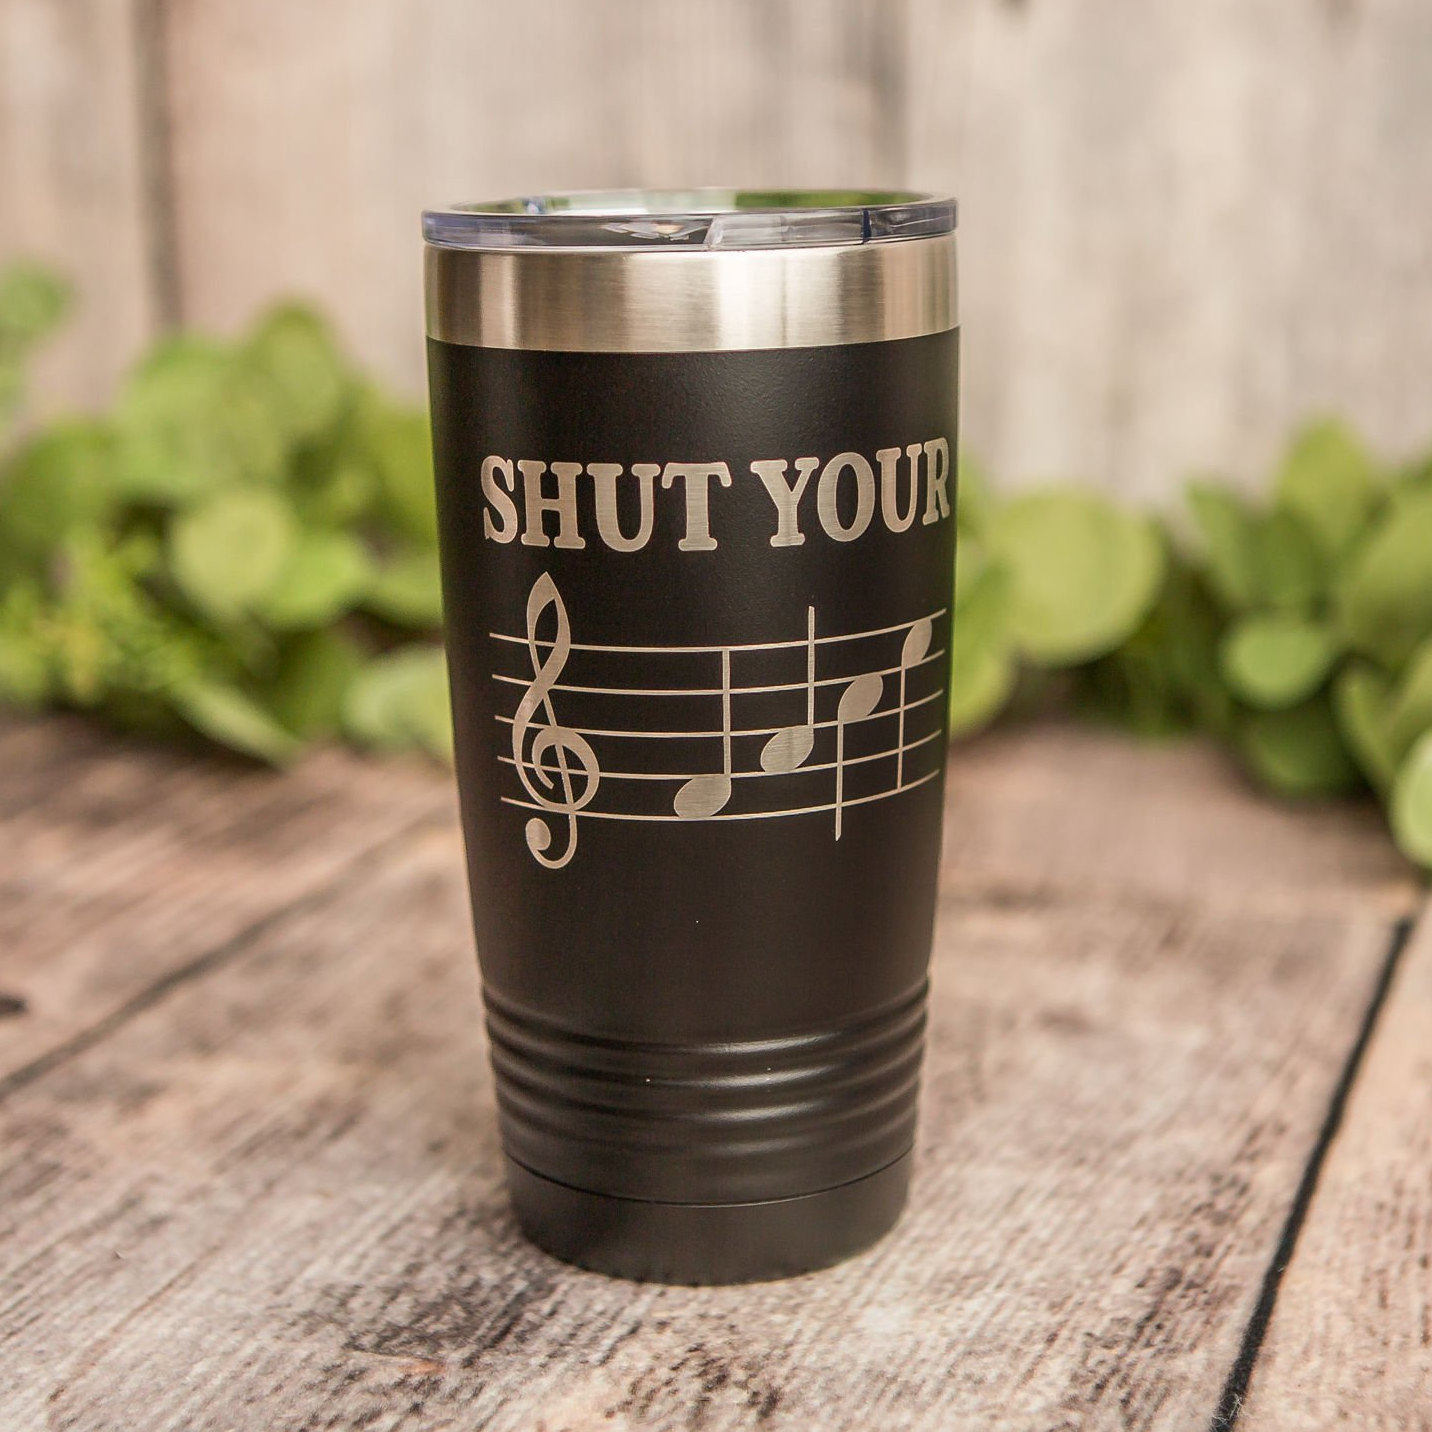 https://3cetching.com/wp-content/uploads/2020/09/shut-your-face-engraved-stainless-steel-tumbler-yeti-style-cup-punny-music-mug-5f5fb246.jpg